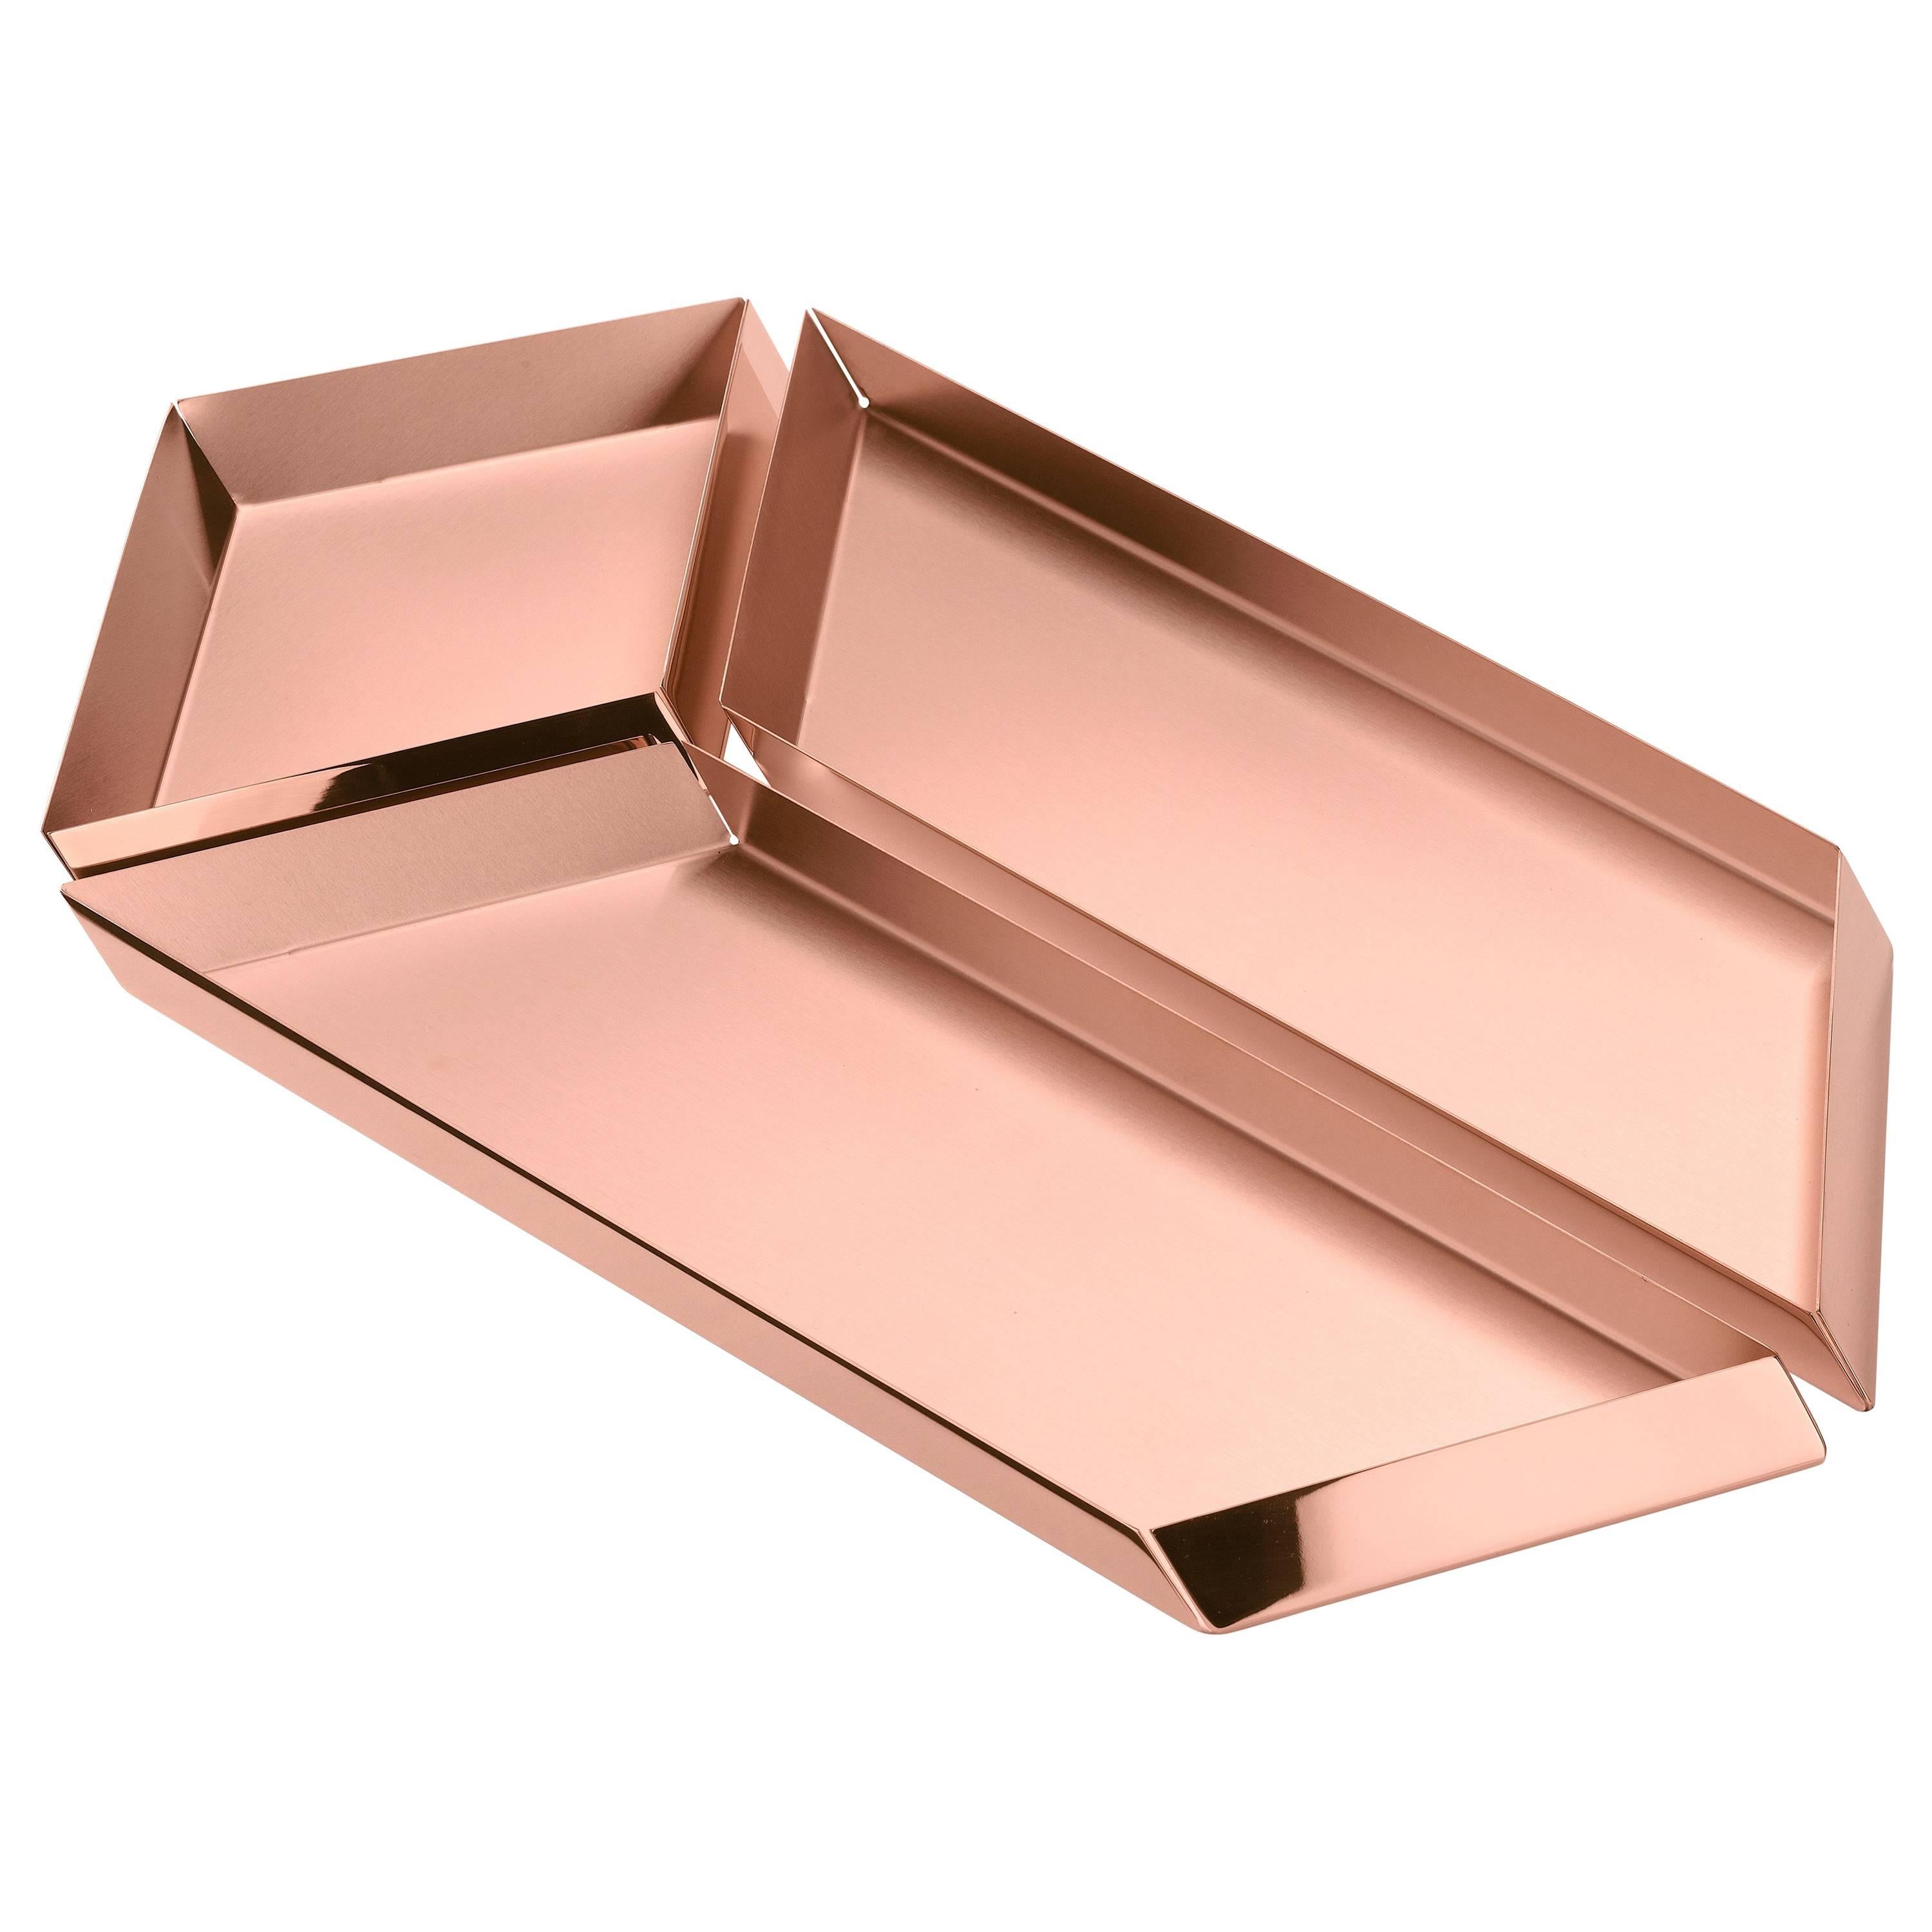 Ghidini 1961 Axonometry Set 4 Large Parallelepiped Tray Set in Rose Gold Finish For Sale